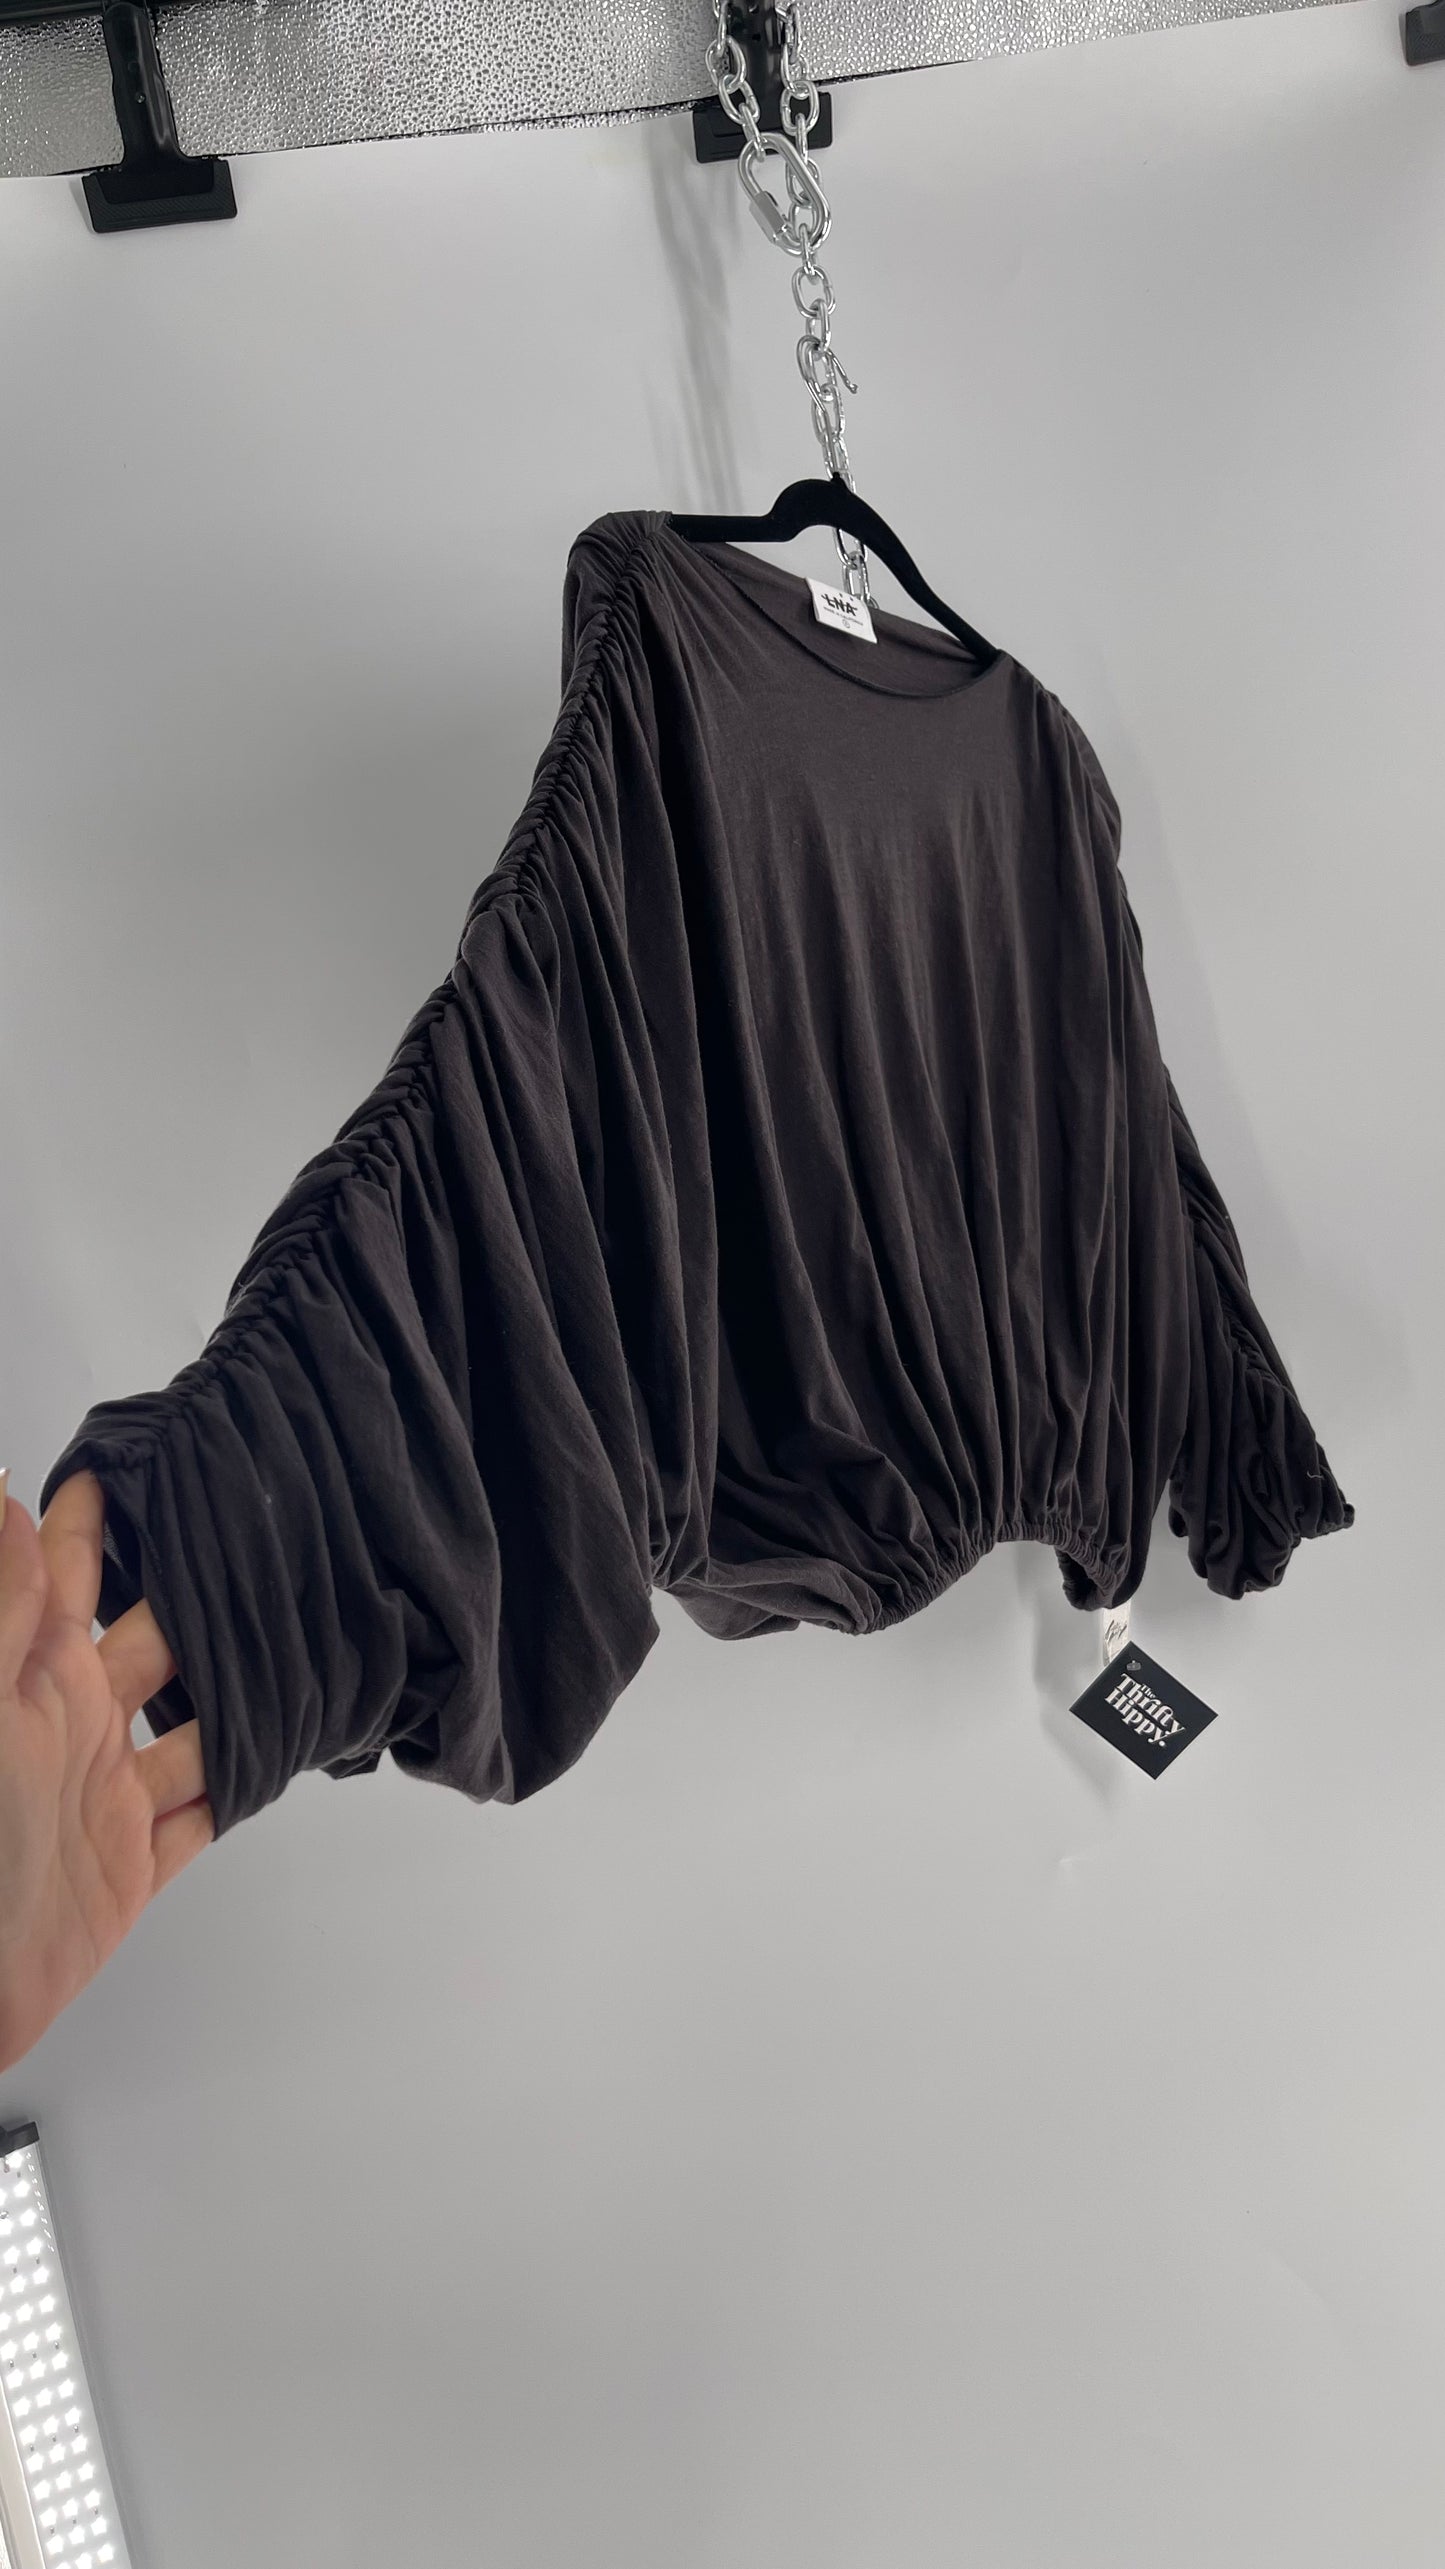 LNA California Made Free People Distopian Dark Grey Drape, Slouchy Ruched Long Sleeve with Tags Attached (Small)